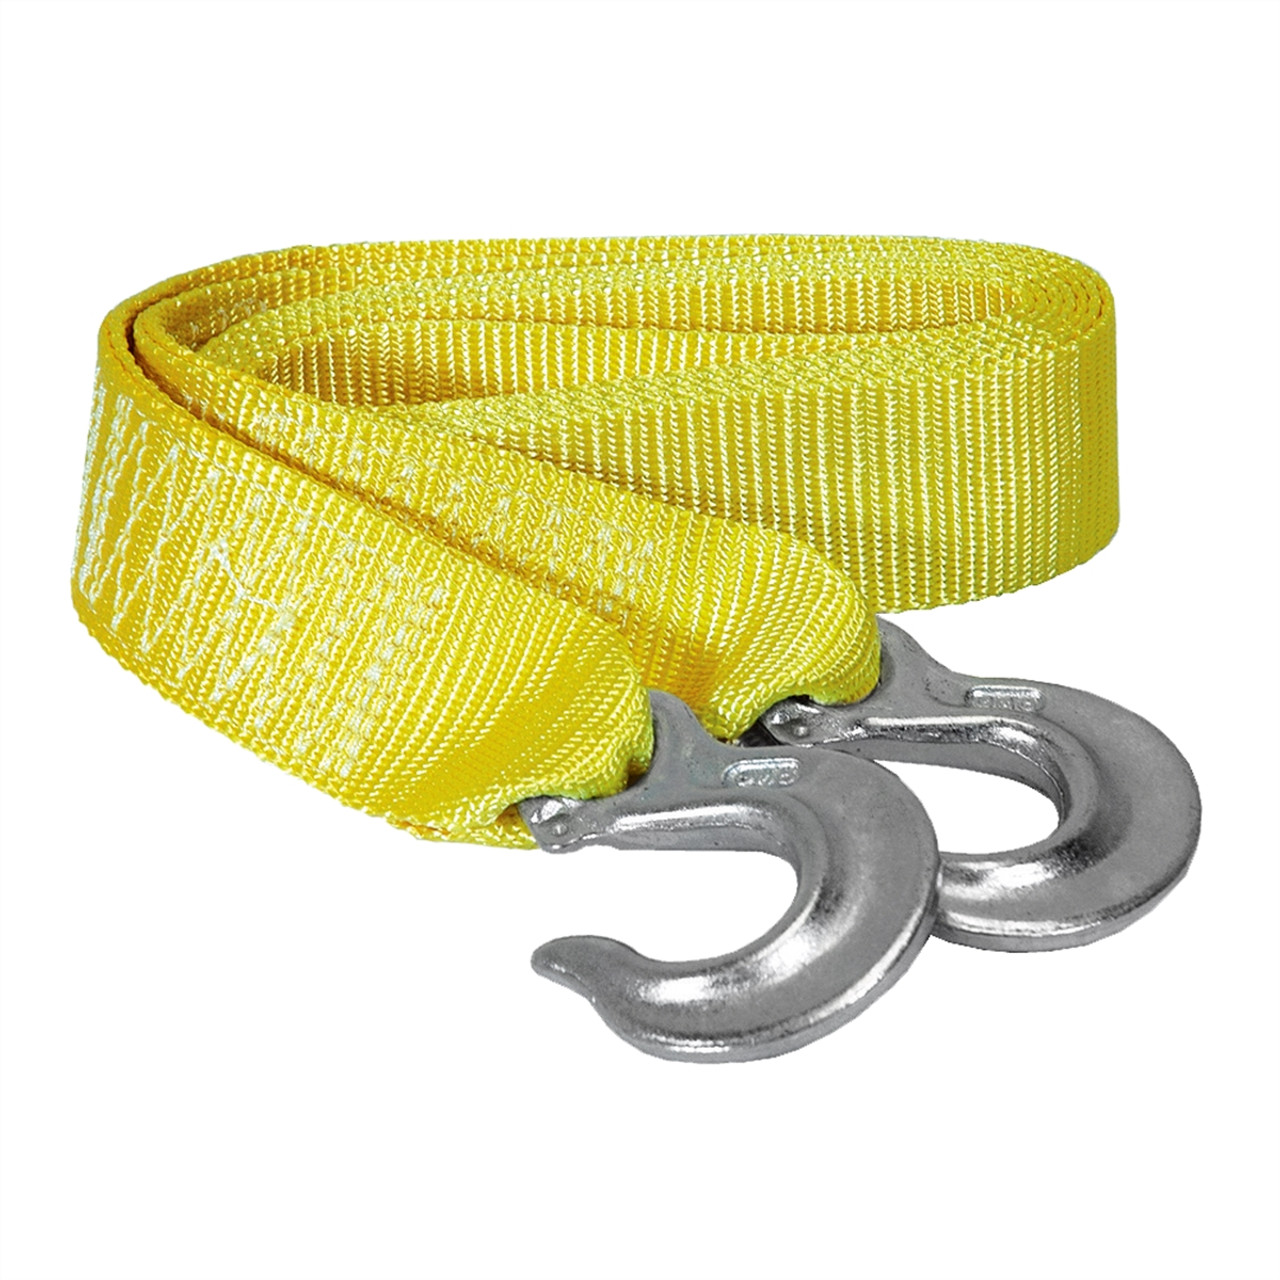 THC-18 TOW STRAP, equipped with metal towing hooks or